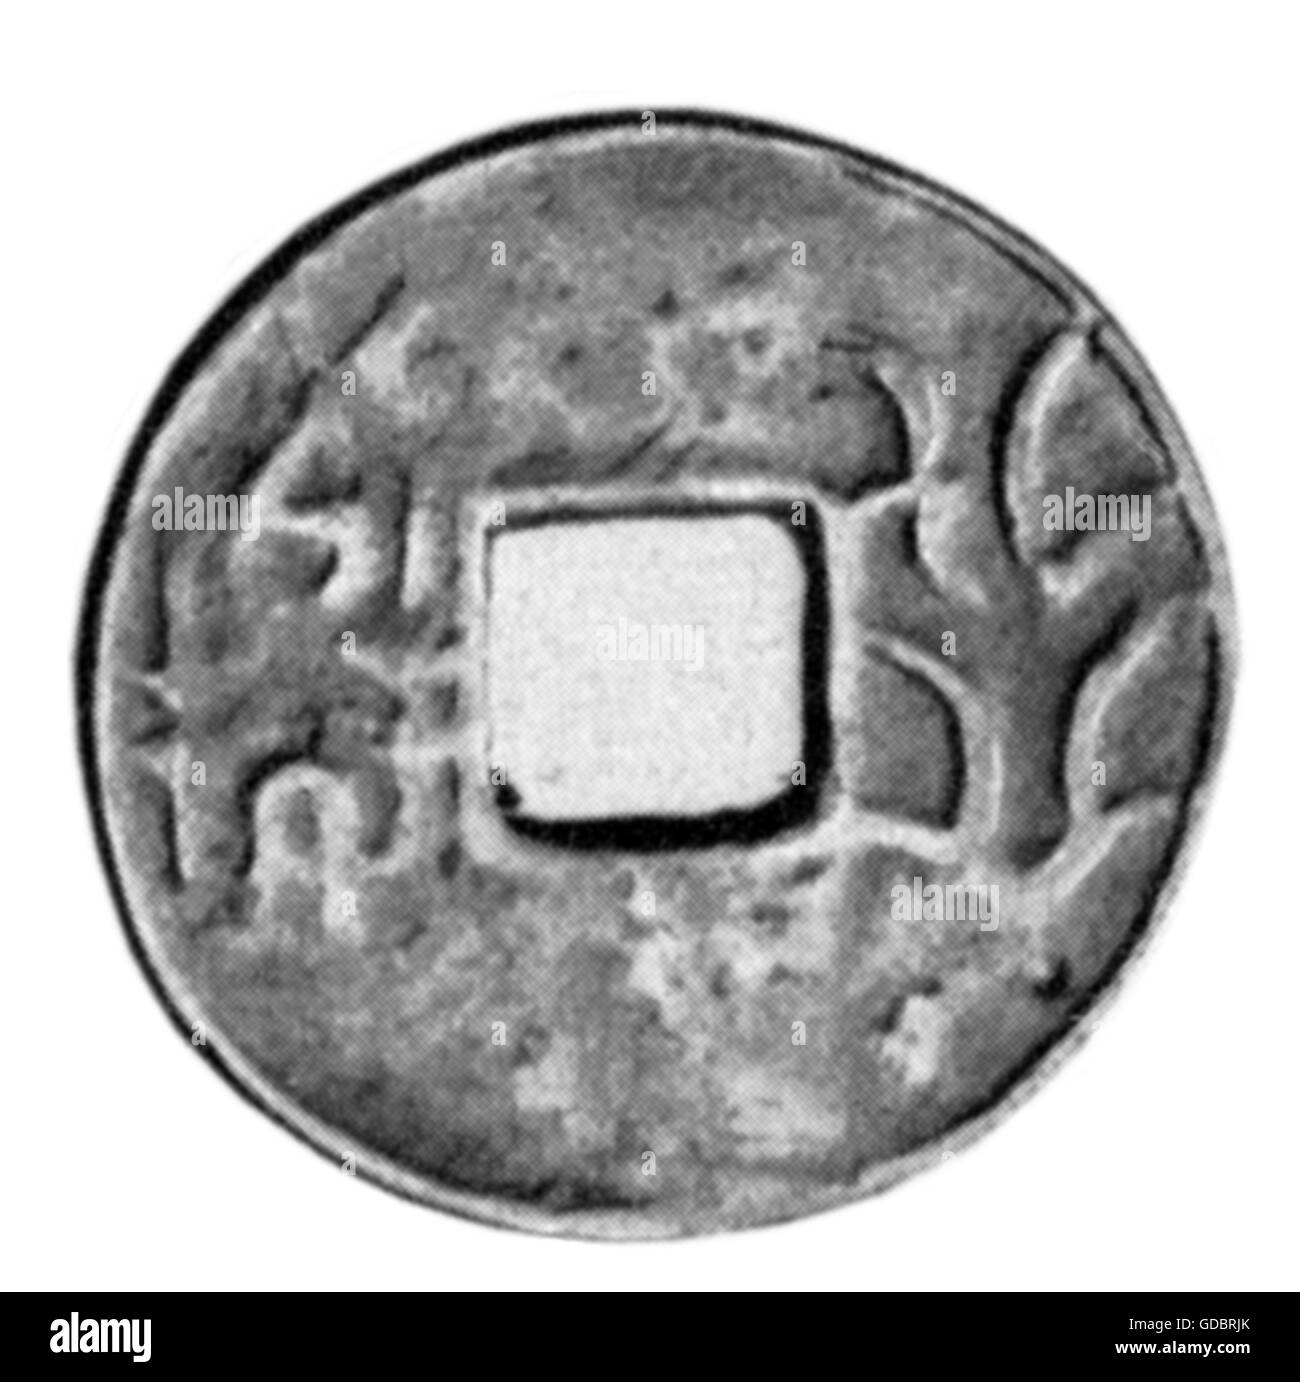 money / finances, coins, China, coin with hole coined by king Jing of Zhou, 523 BC, ancient world, ancient times, numismatics, Asia, Yuan Dynasty, Jing of Zhou, inscription, epigraphs, inscriptions, character, characters, coins, coin, mint, coining, minting, historic, historical, ancient world, Additional-Rights-Clearences-Not Available Stock Photo